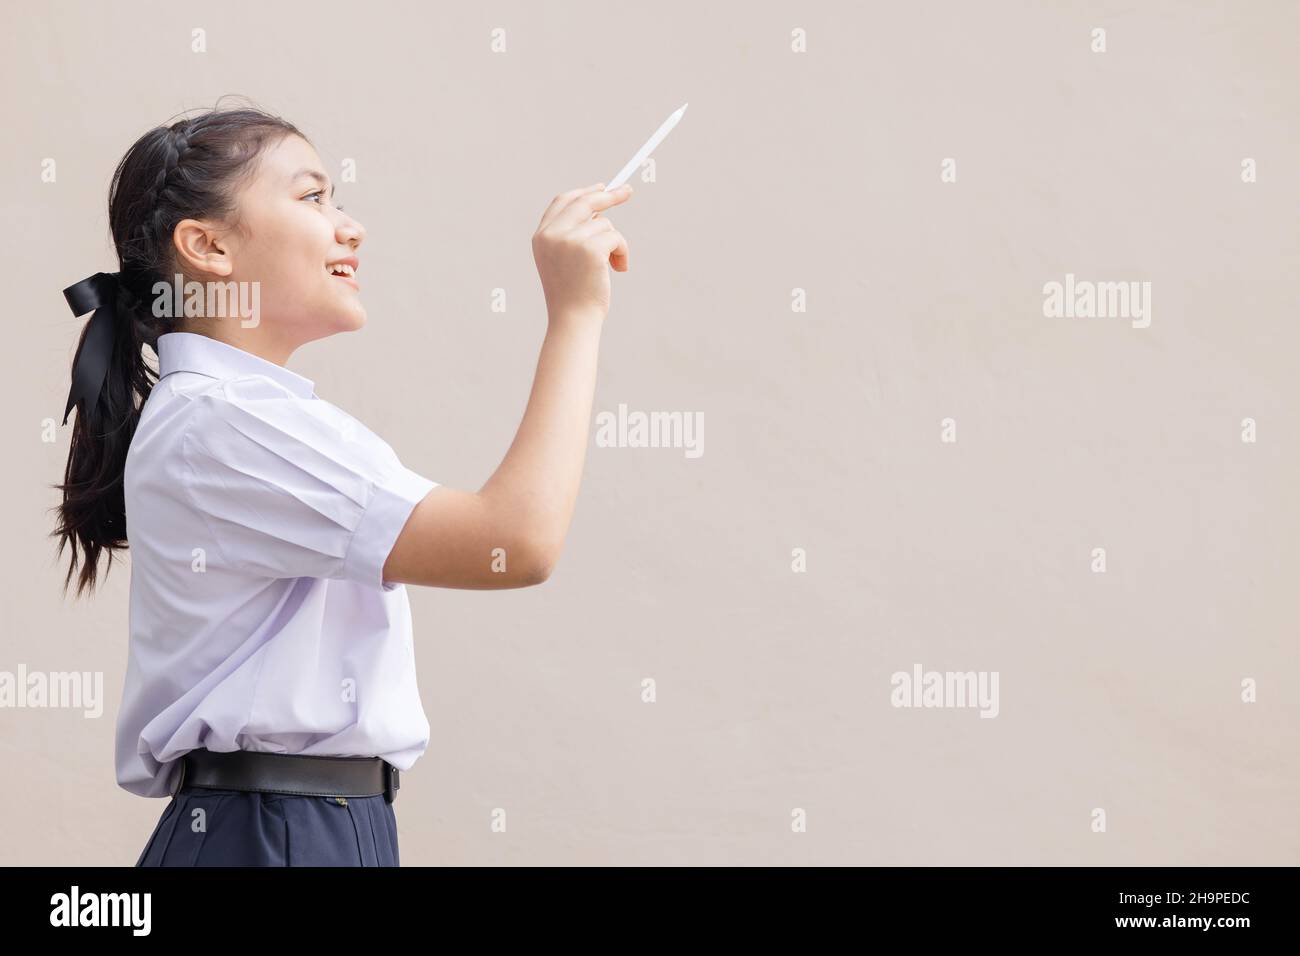 Young Asian student in school uniform girl teen hand drawing bring imagination new idea concept. Stock Photo